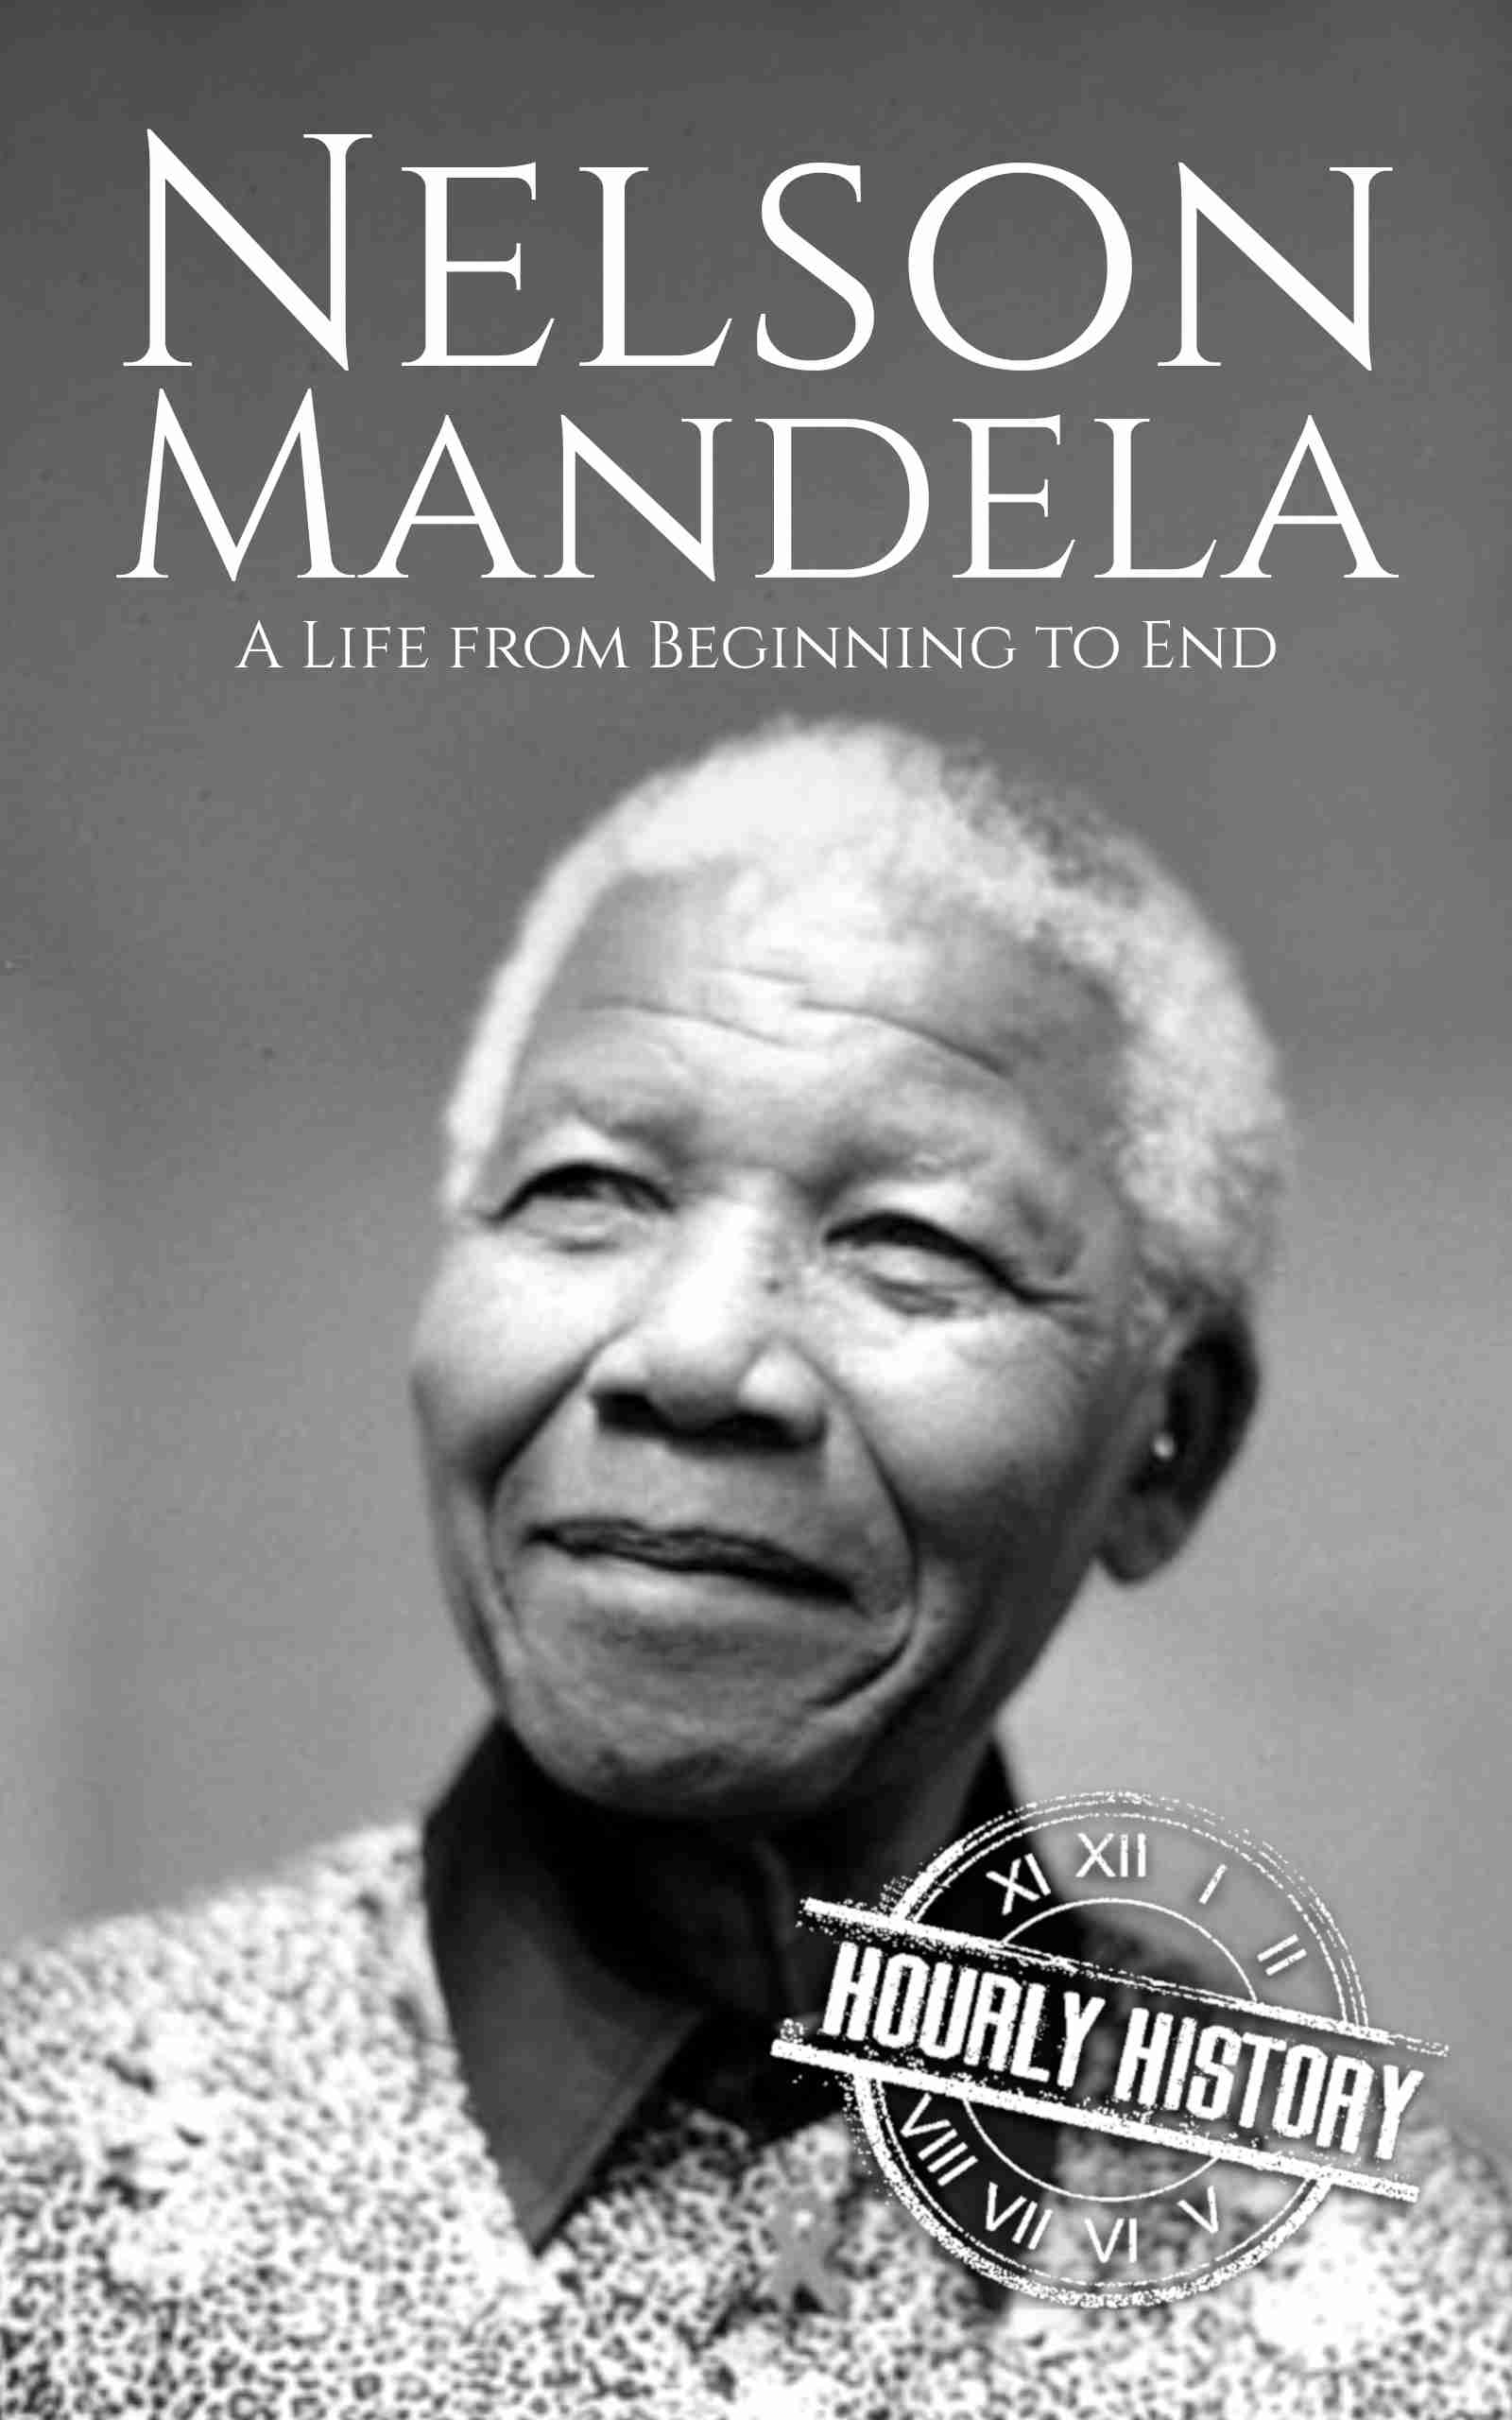 biography of nelson mandela for project file